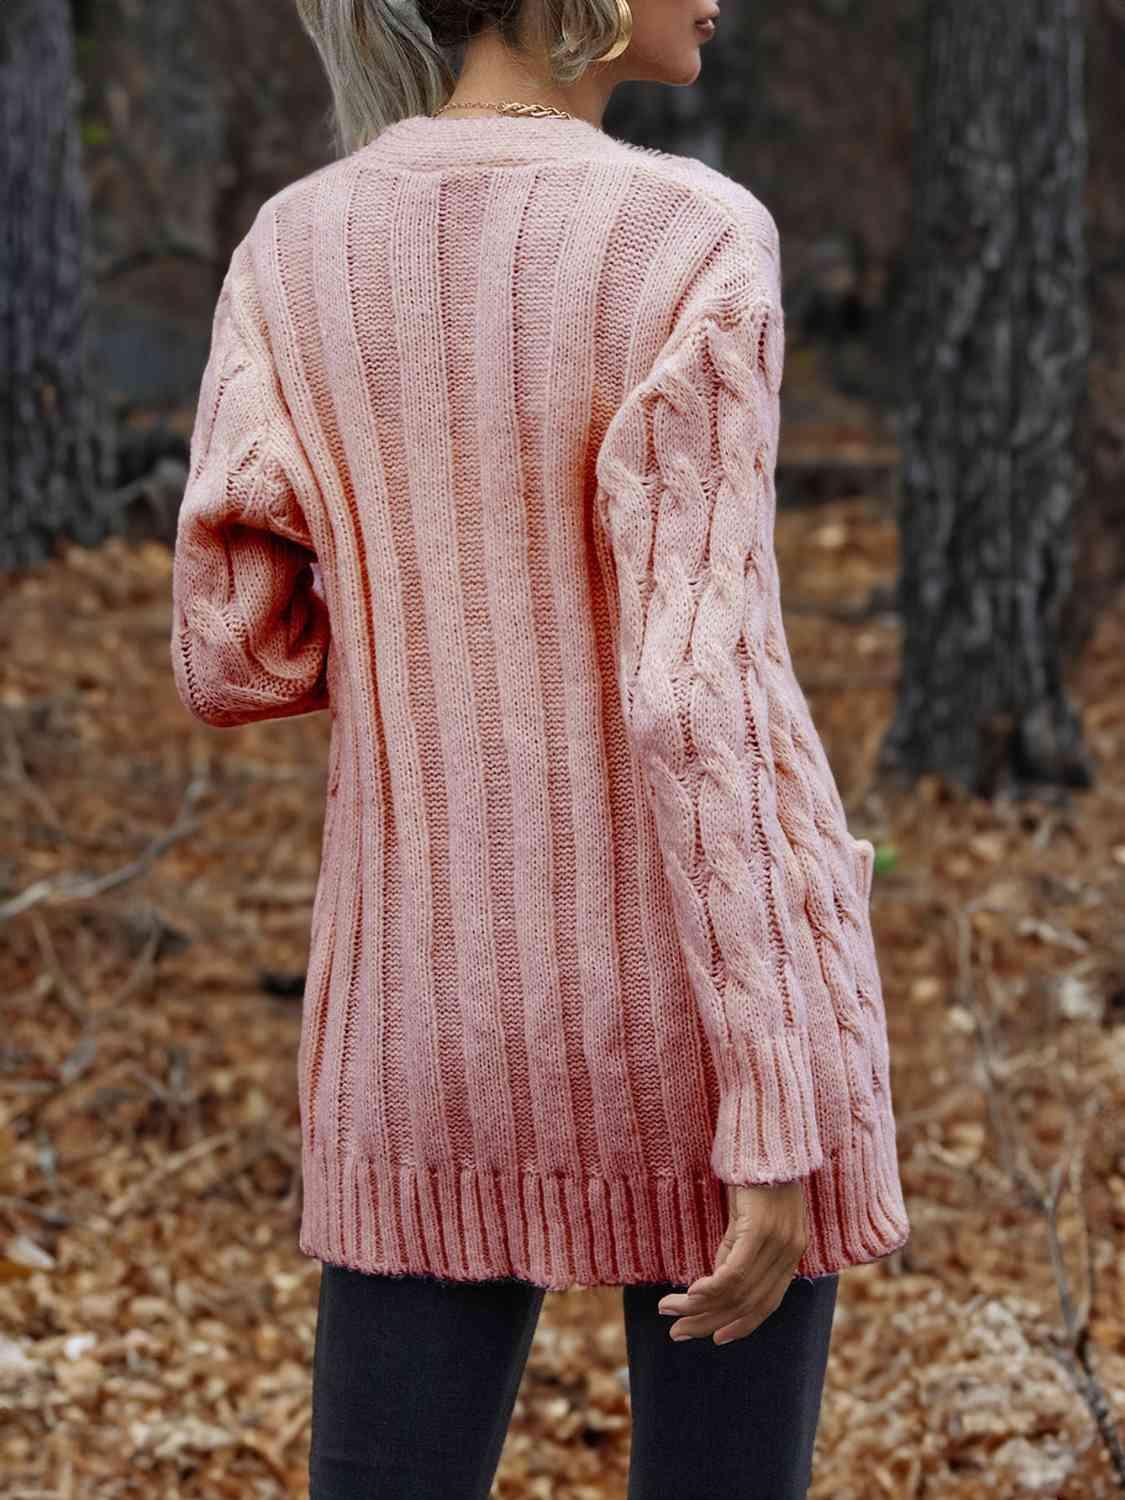 a woman wearing a pink sweater in the woods